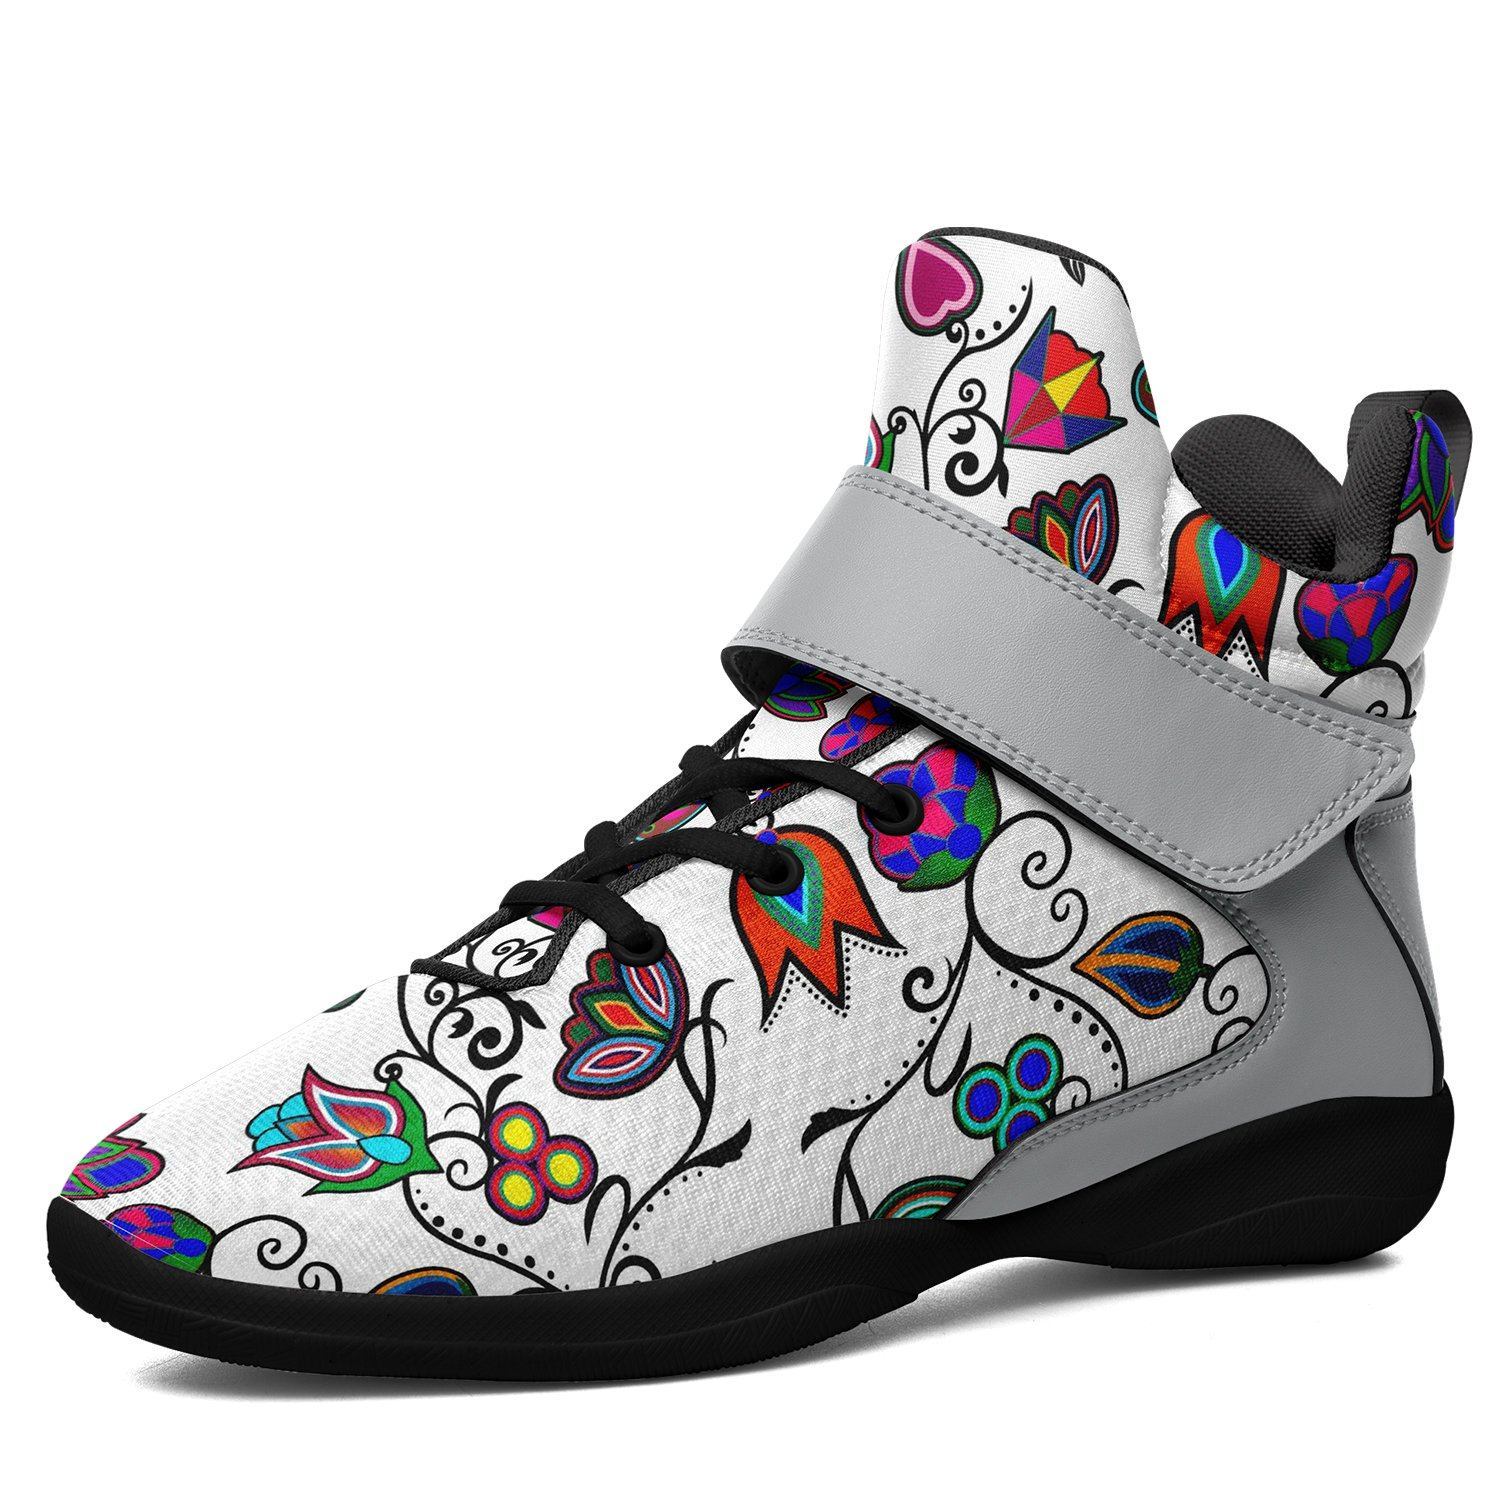 Indigenous Paisley White Kid's Ipottaa Basketball / Sport High Top Shoes 49 Dzine US Child 12.5 / EUR 30 Black Sole with Gray Strap 